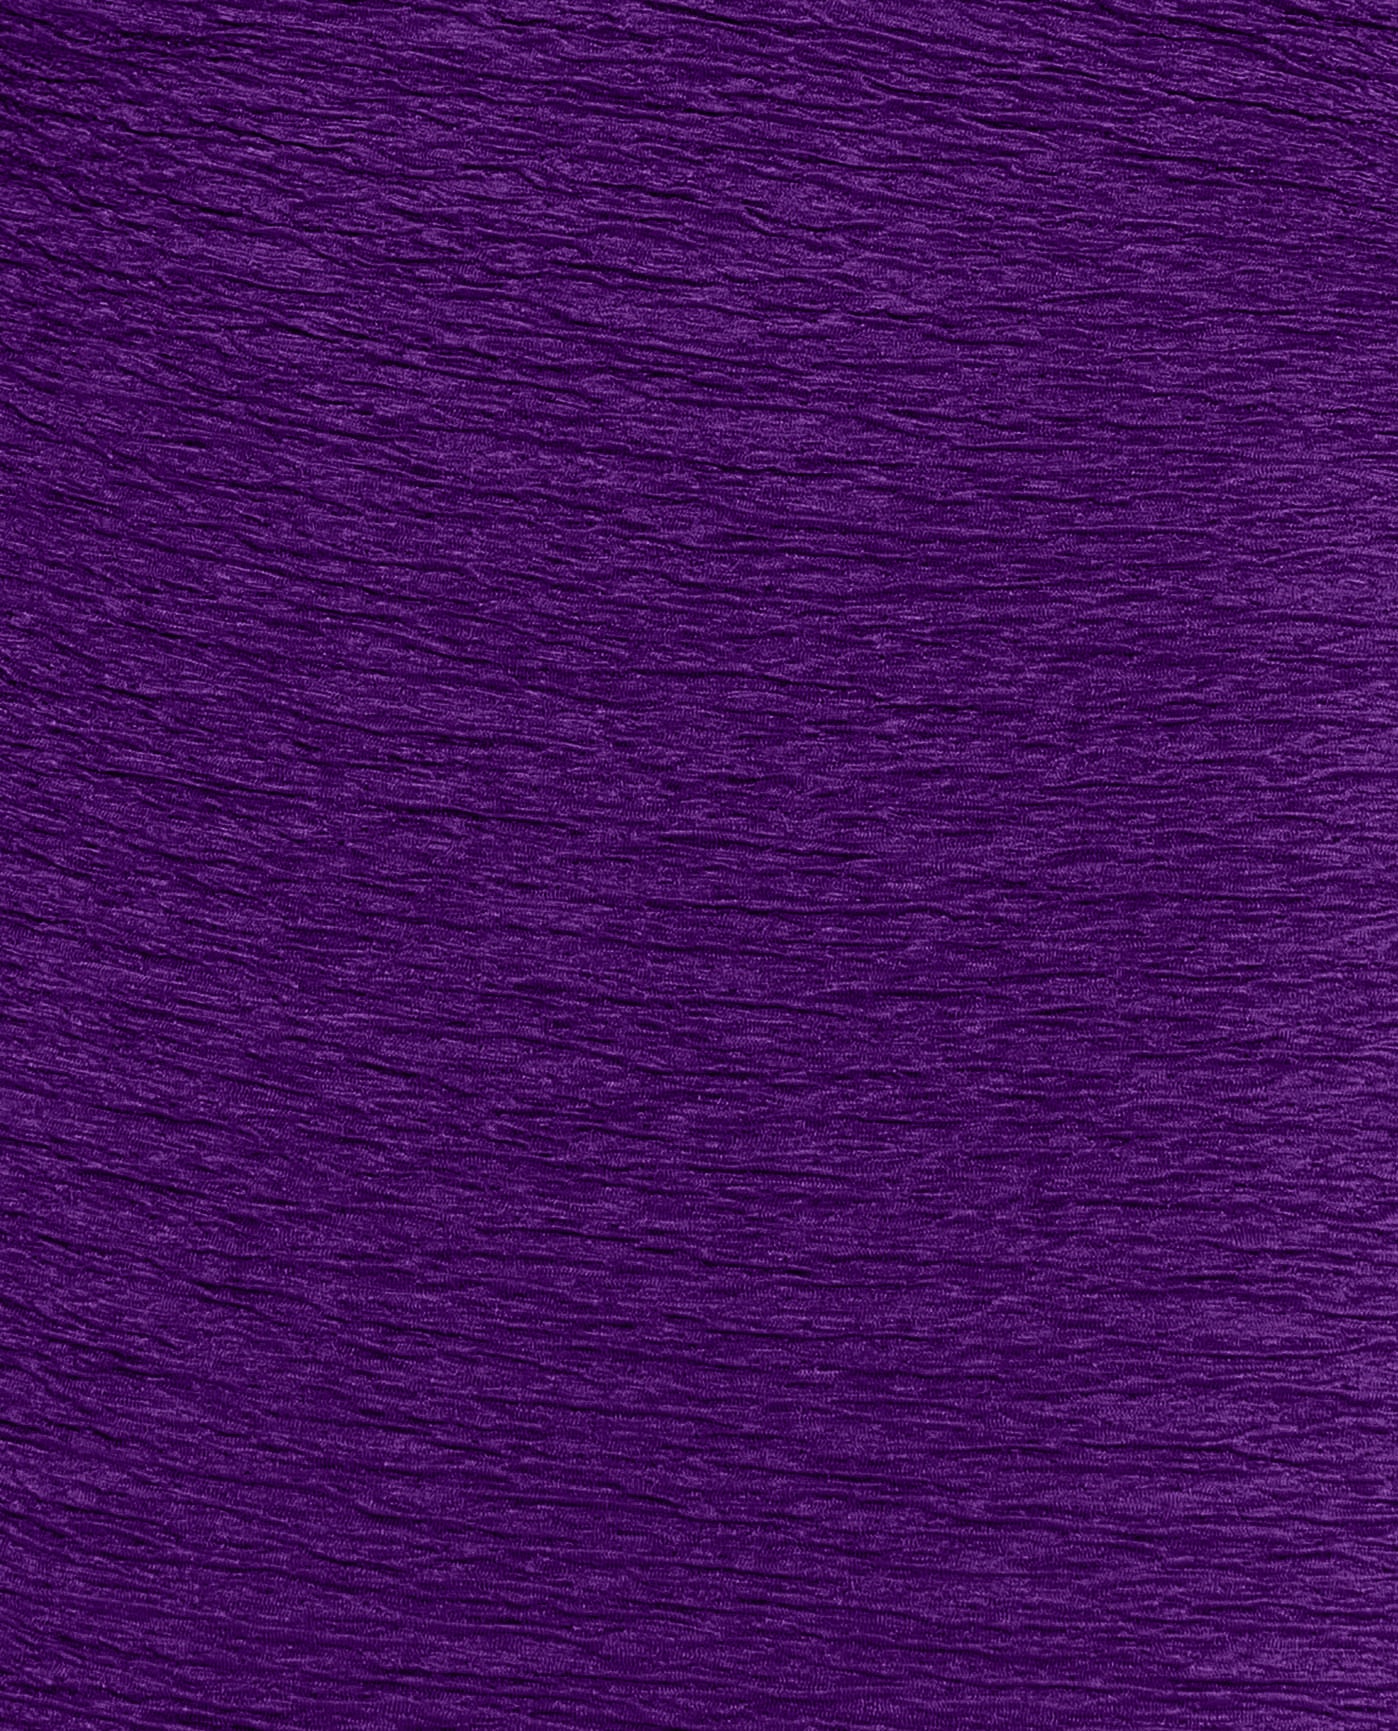 FABRIC SWATCH VIEW OF CHLORINE RESISTANT KRINKLE TEXTURED COLOR BLOCK TWIST FRONT ONE PIECE | KRINKLE ACAI PURPLE